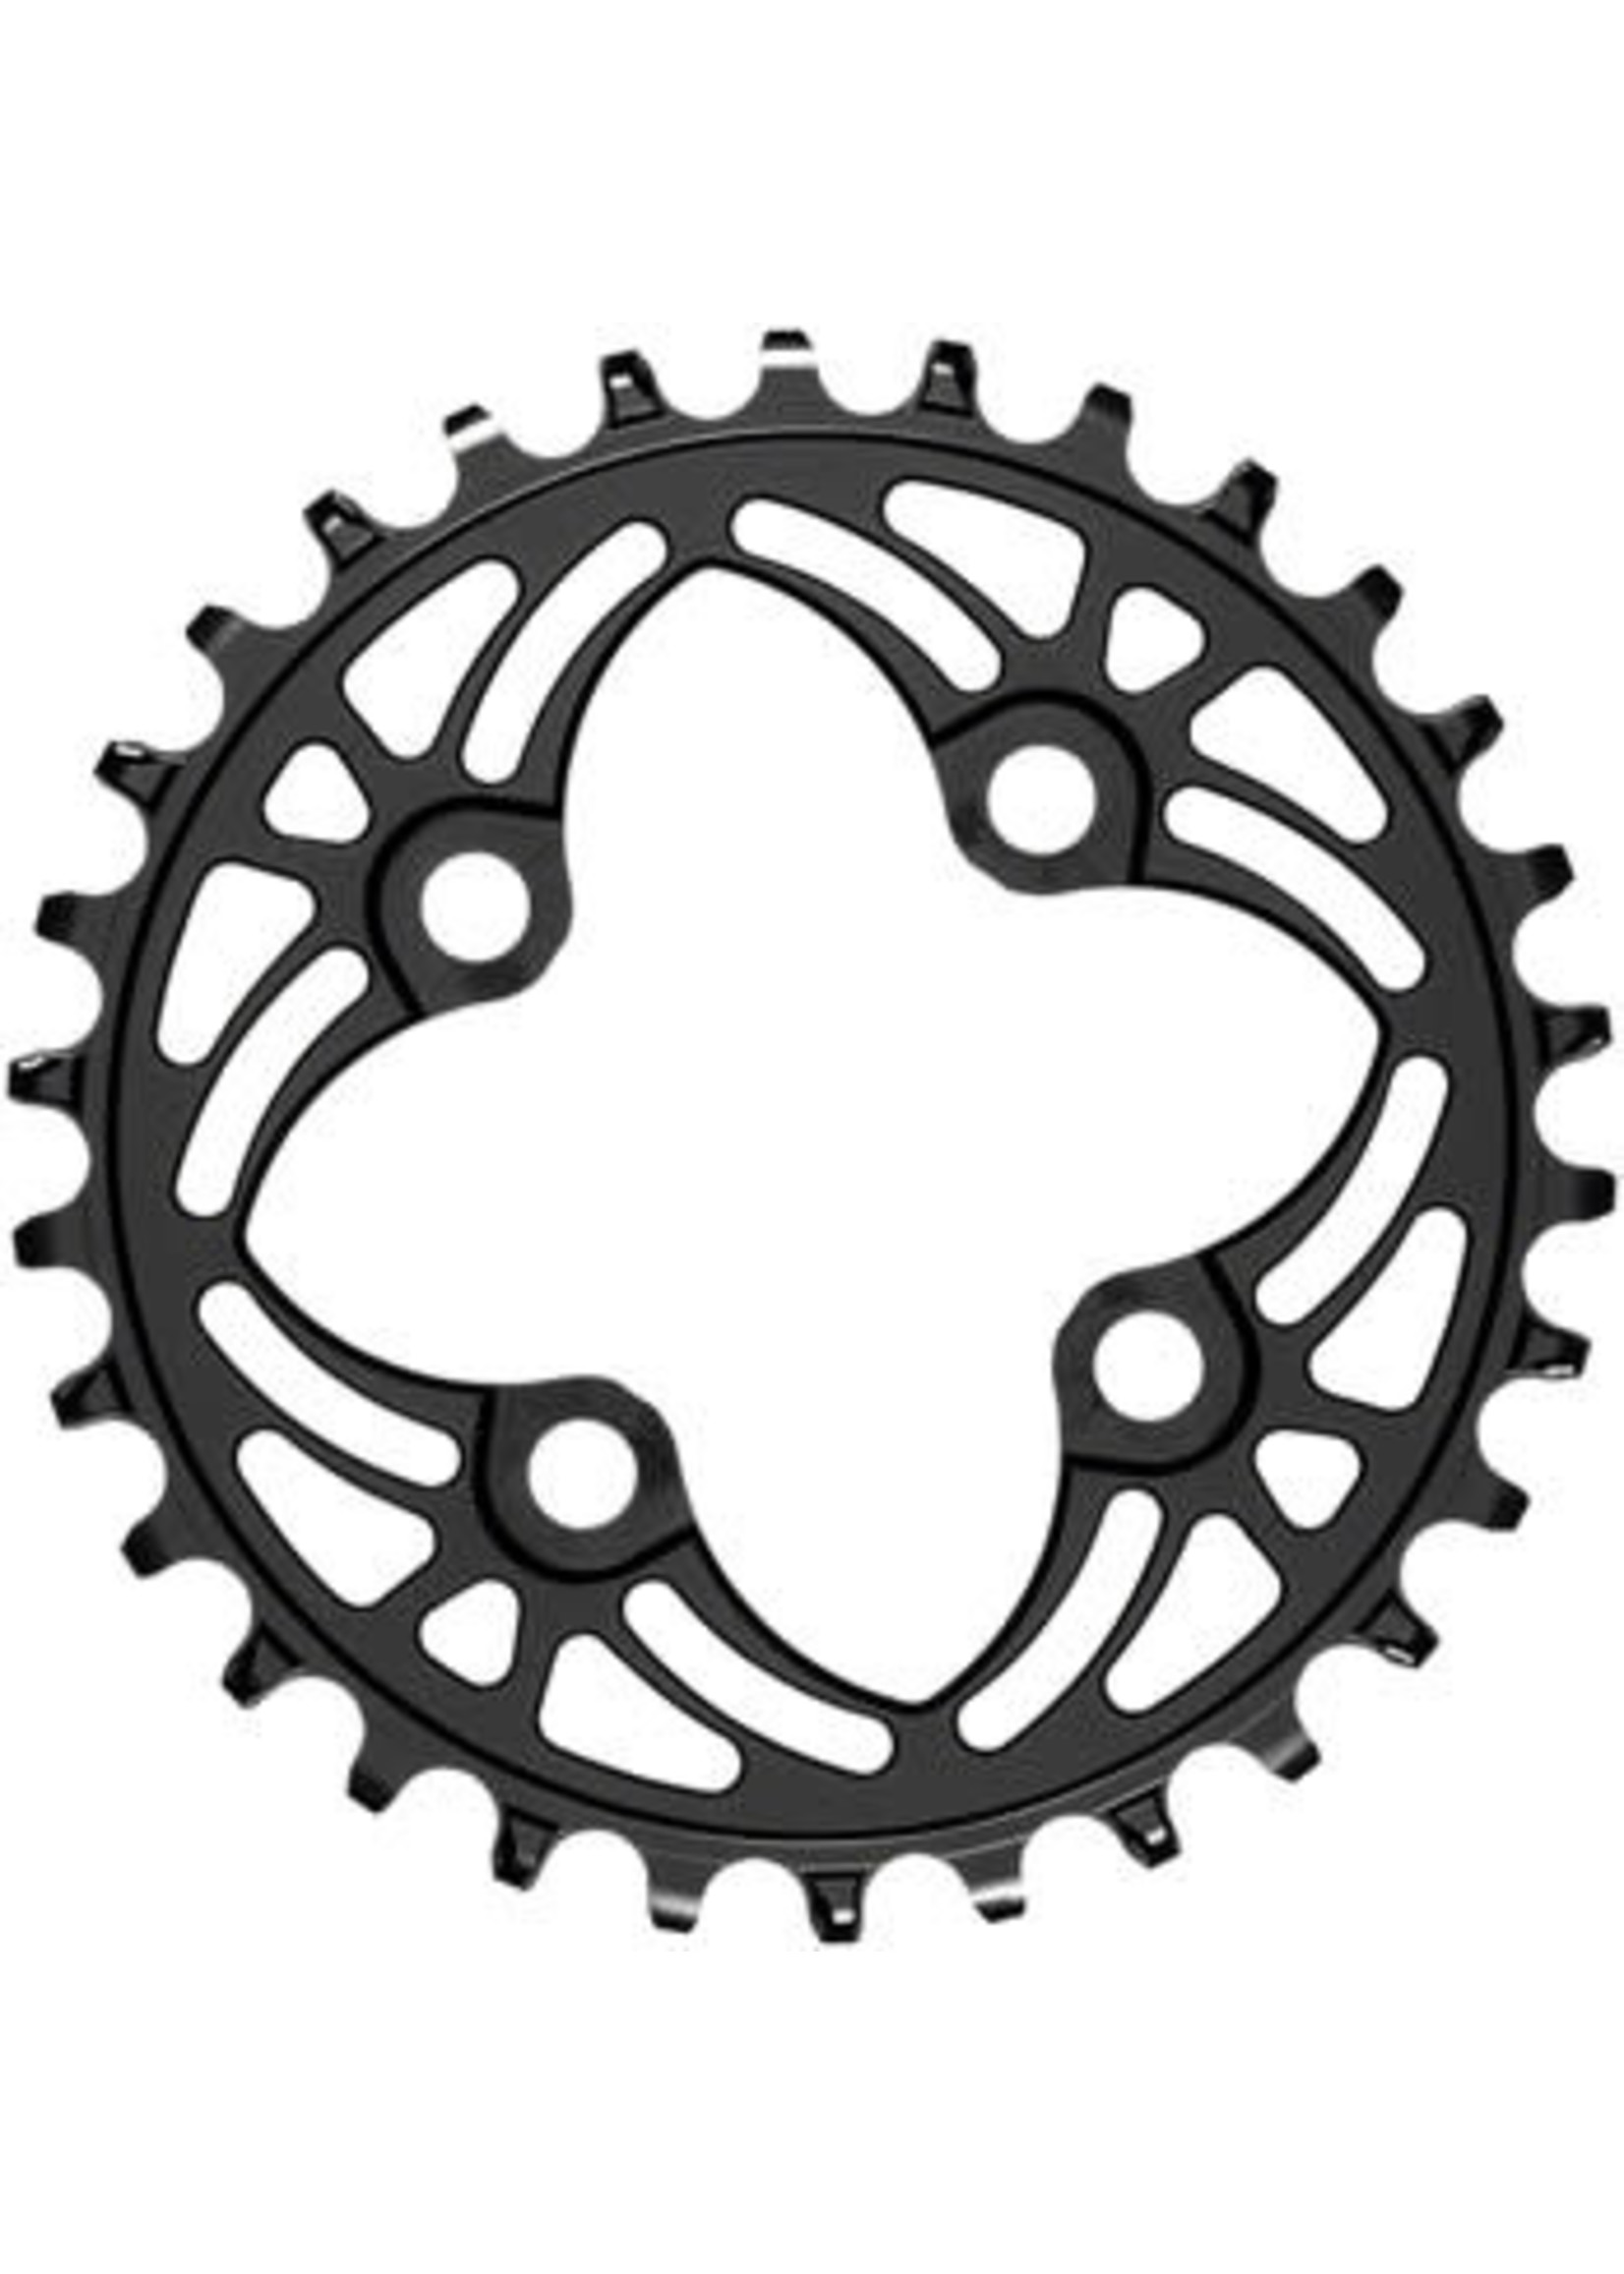 Absolute Black absoluteBLACK Round 64 BCD Chainring - 30t, 64 BCD, 4-Bolt, Narrow-Wide, Black